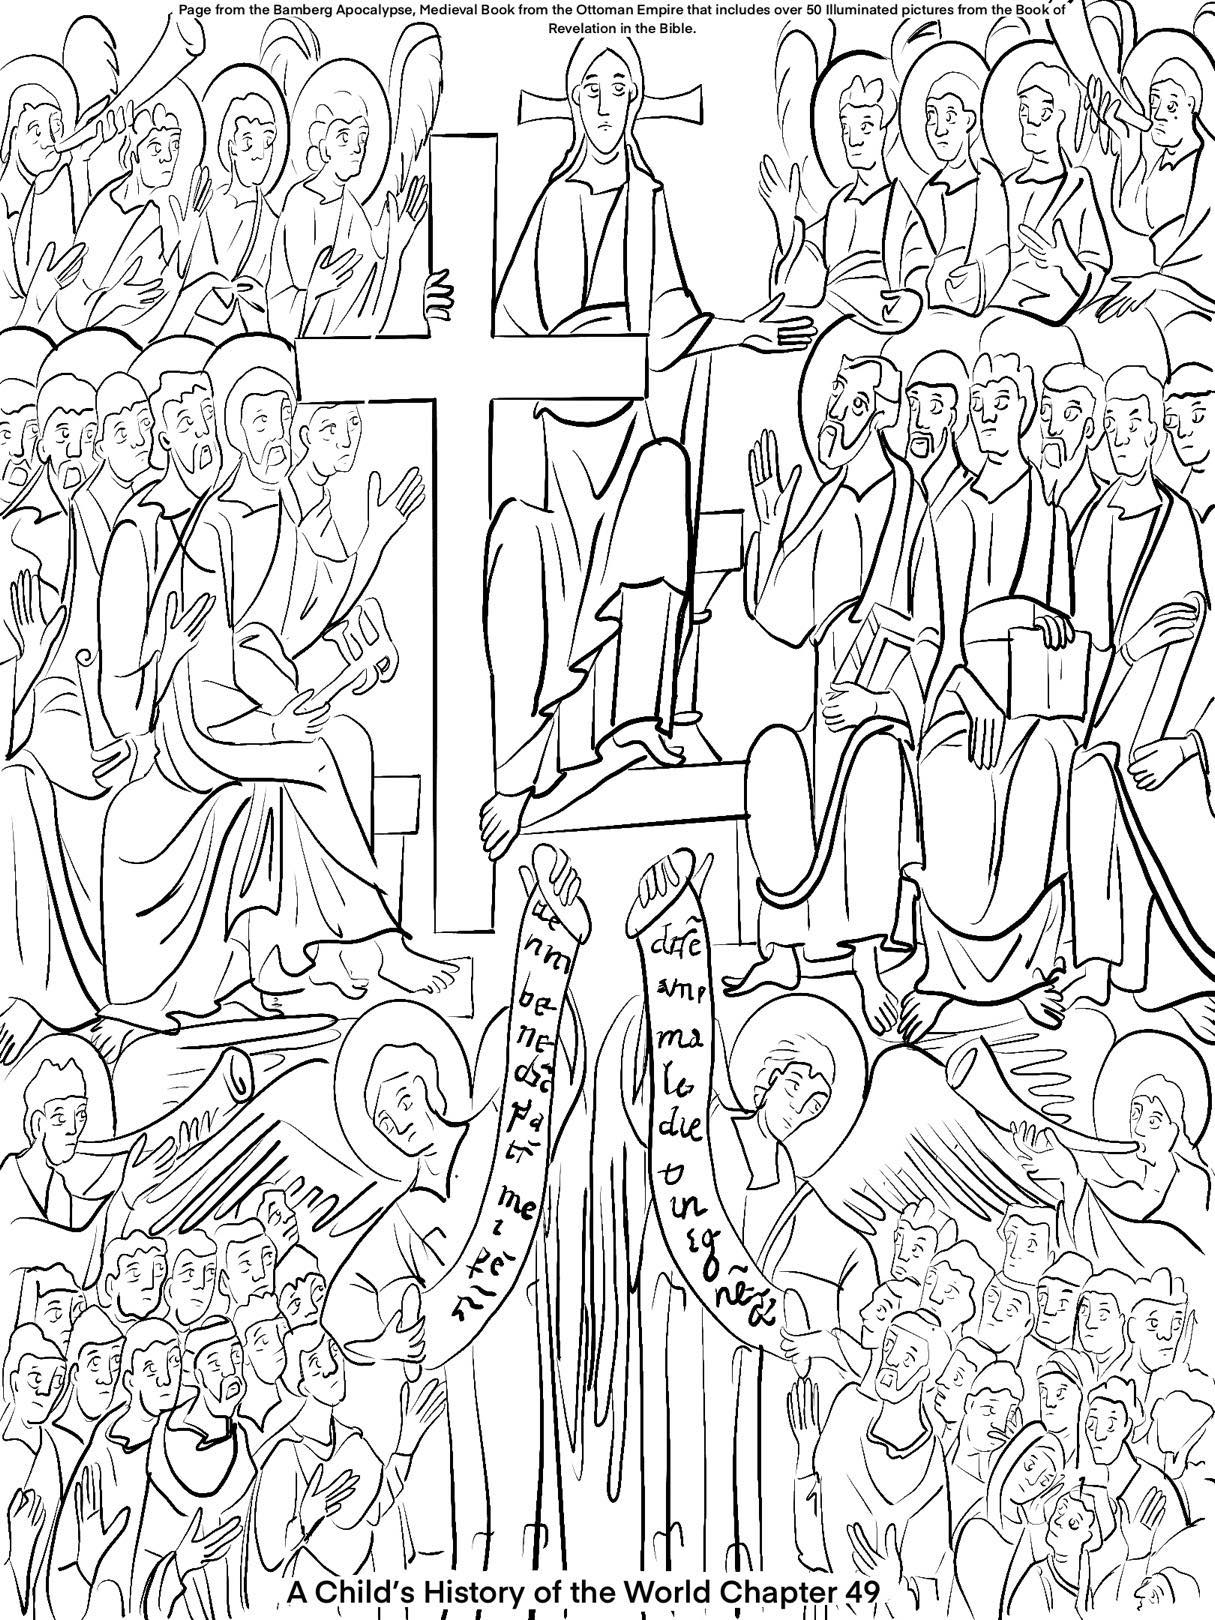 A Child’s History of the World Chapter 49 Coloring Page - Once Upon a ...